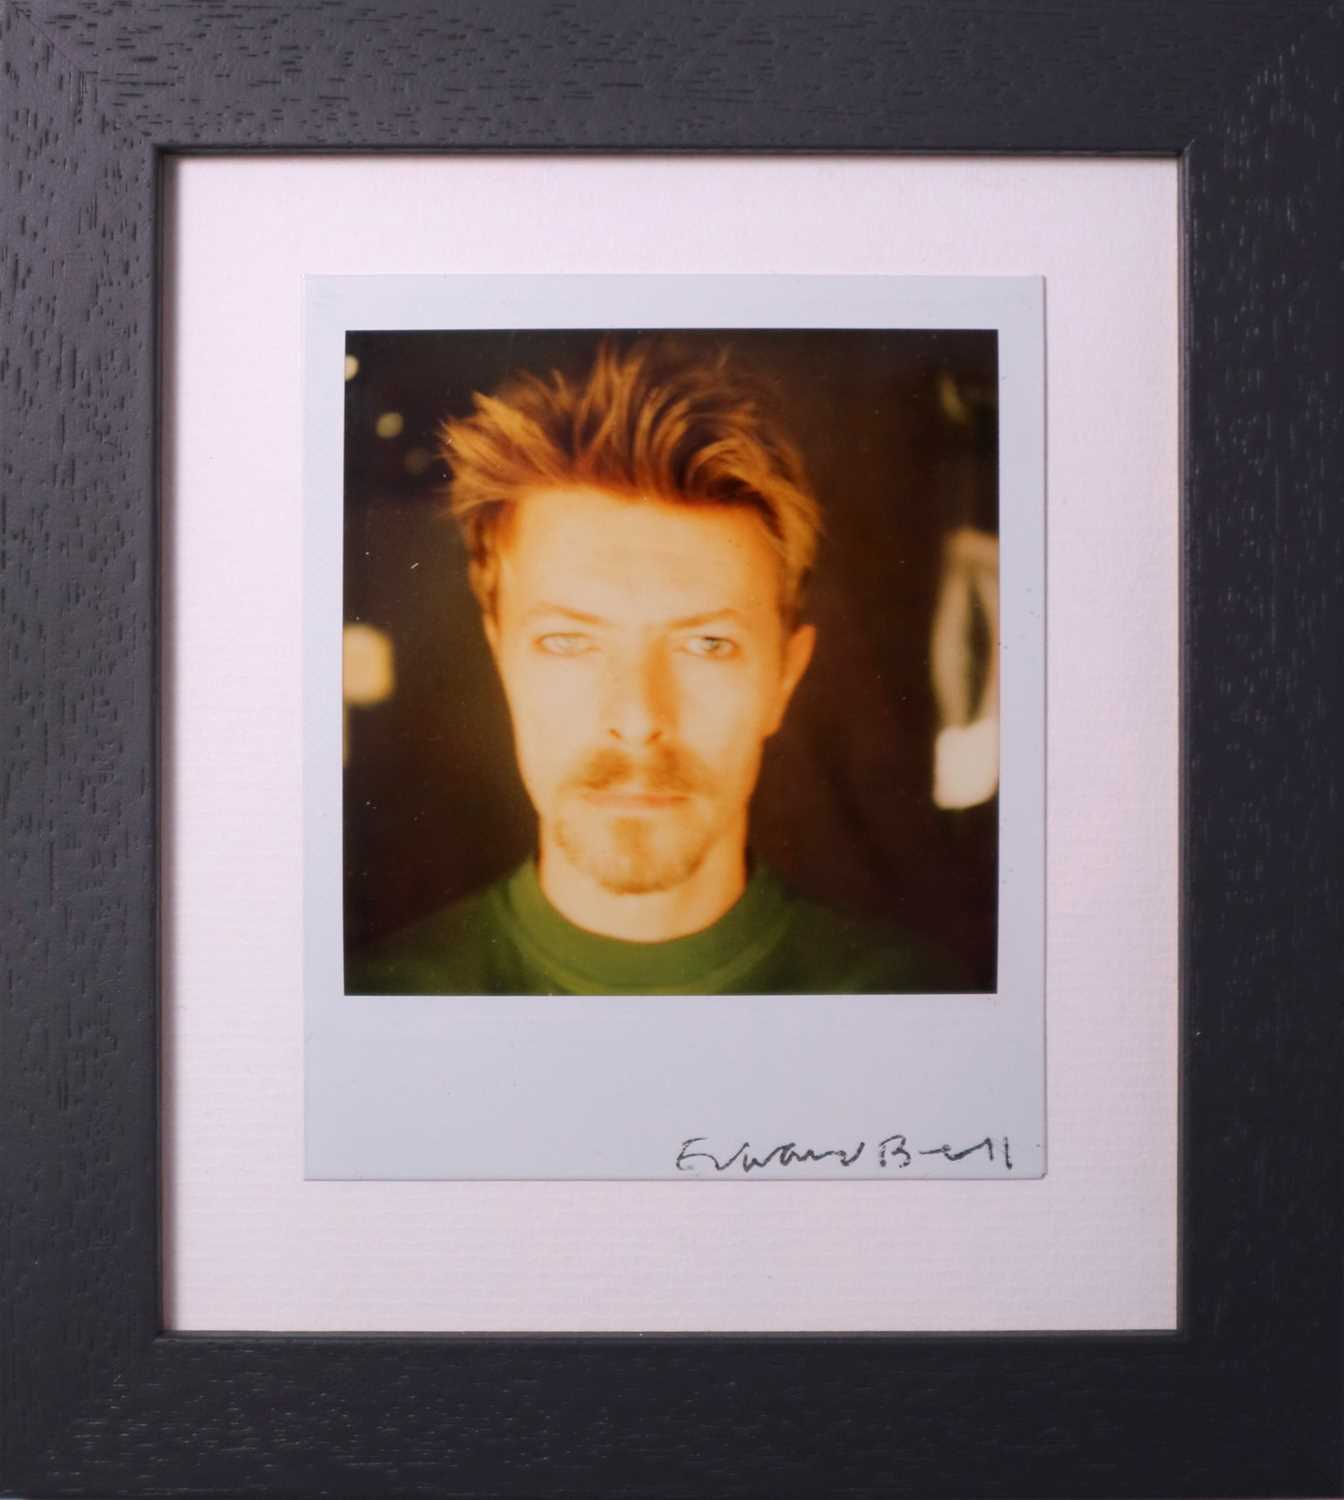 Lot 31 - Edward Bell (British Contemporary) David Bowie with Goatee polaroid